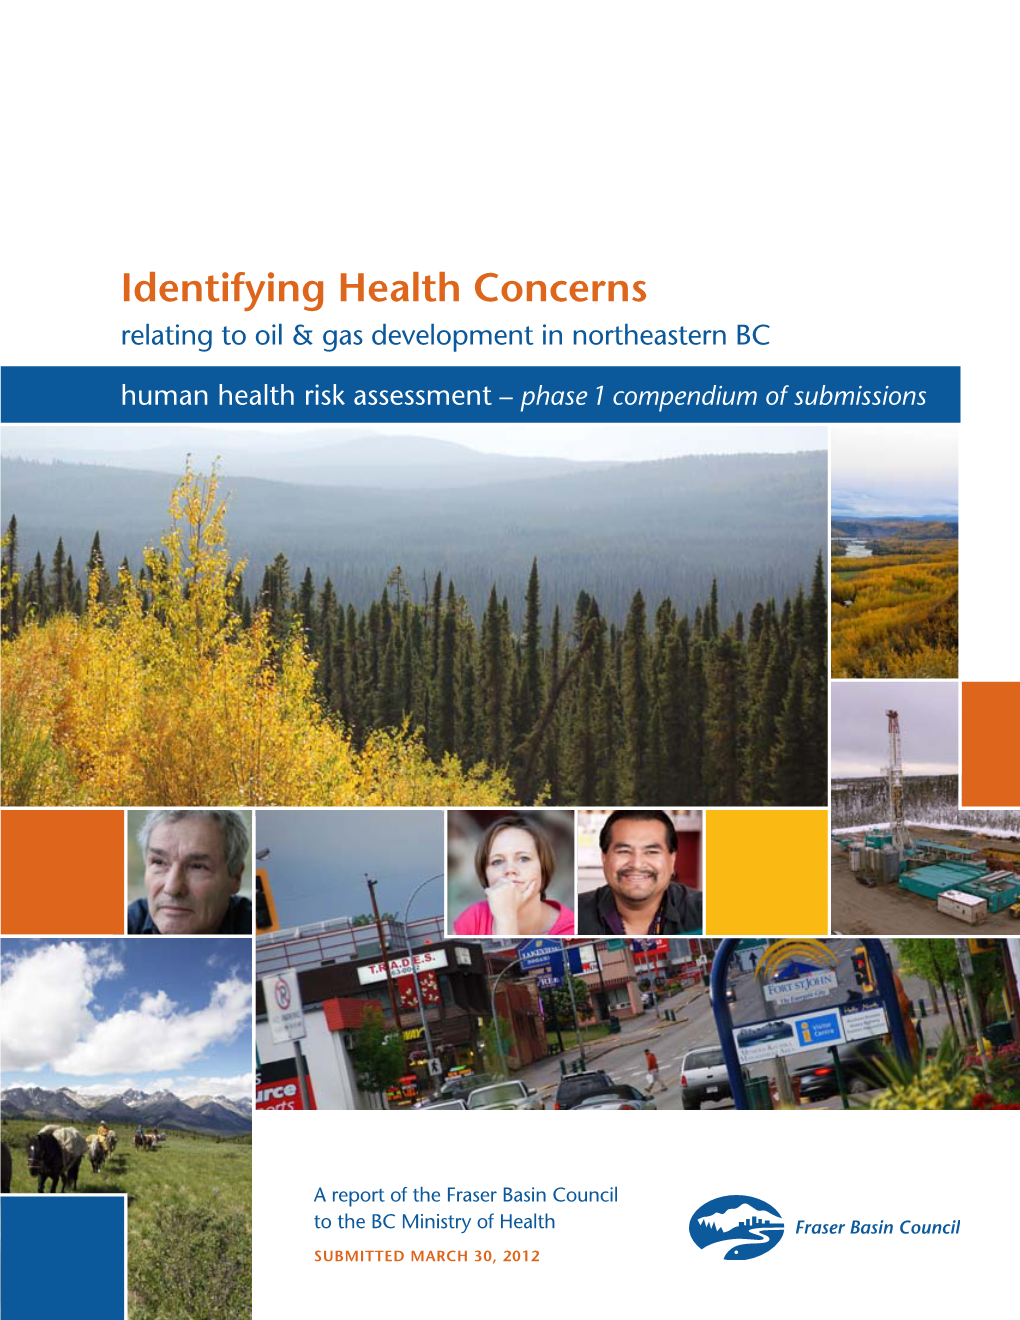 Identifying Health Concerns Relating to Oil & Gas Development In